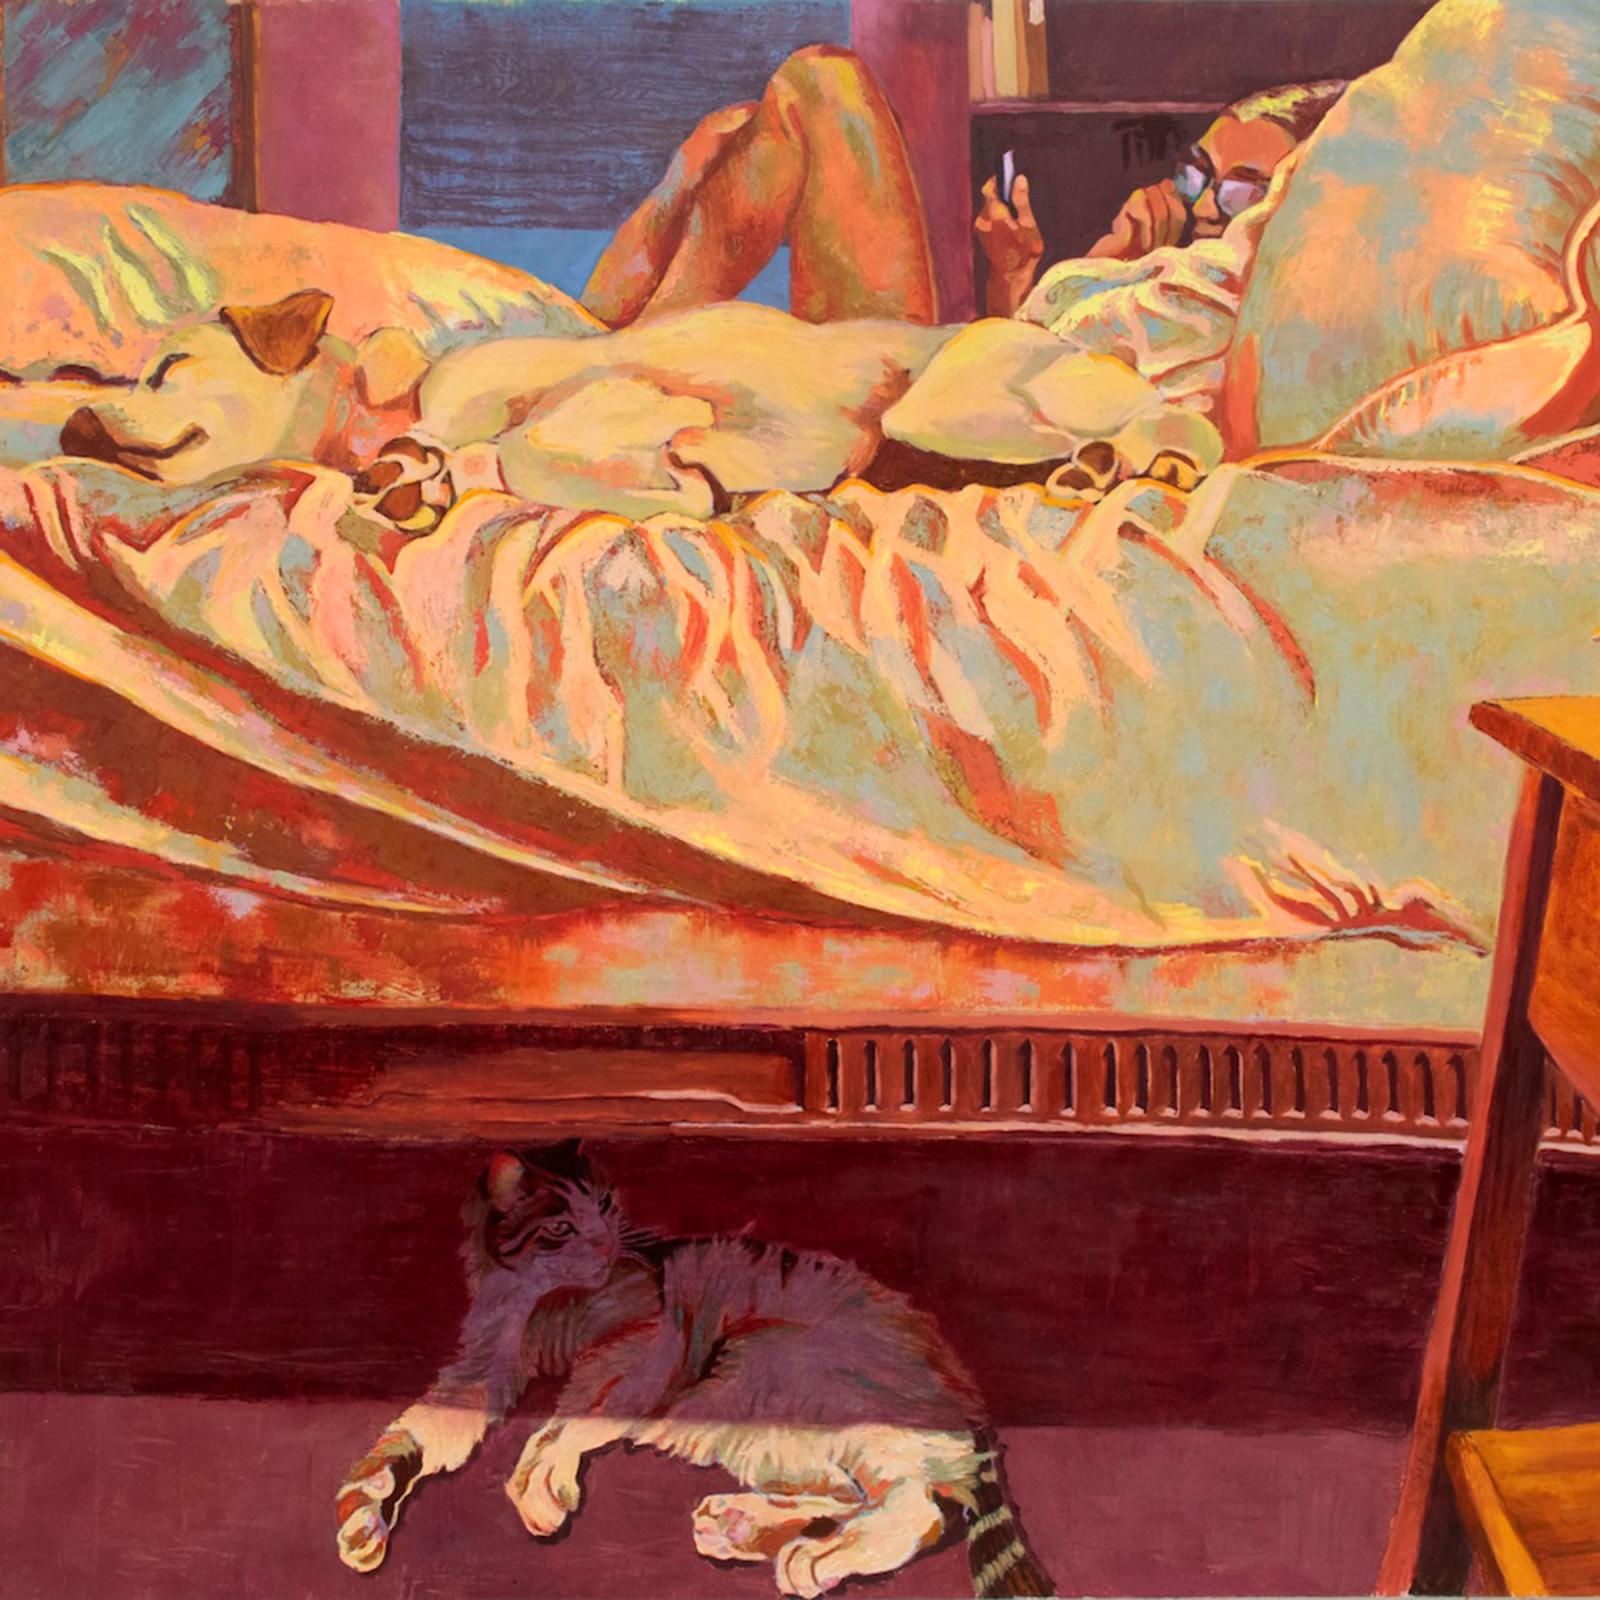 Painting of a person and dog on a bed with a cat below called Twilight Time by Margaret Zox Brown displayed in the We're Home exhibition in the Pace University Art Gallery.